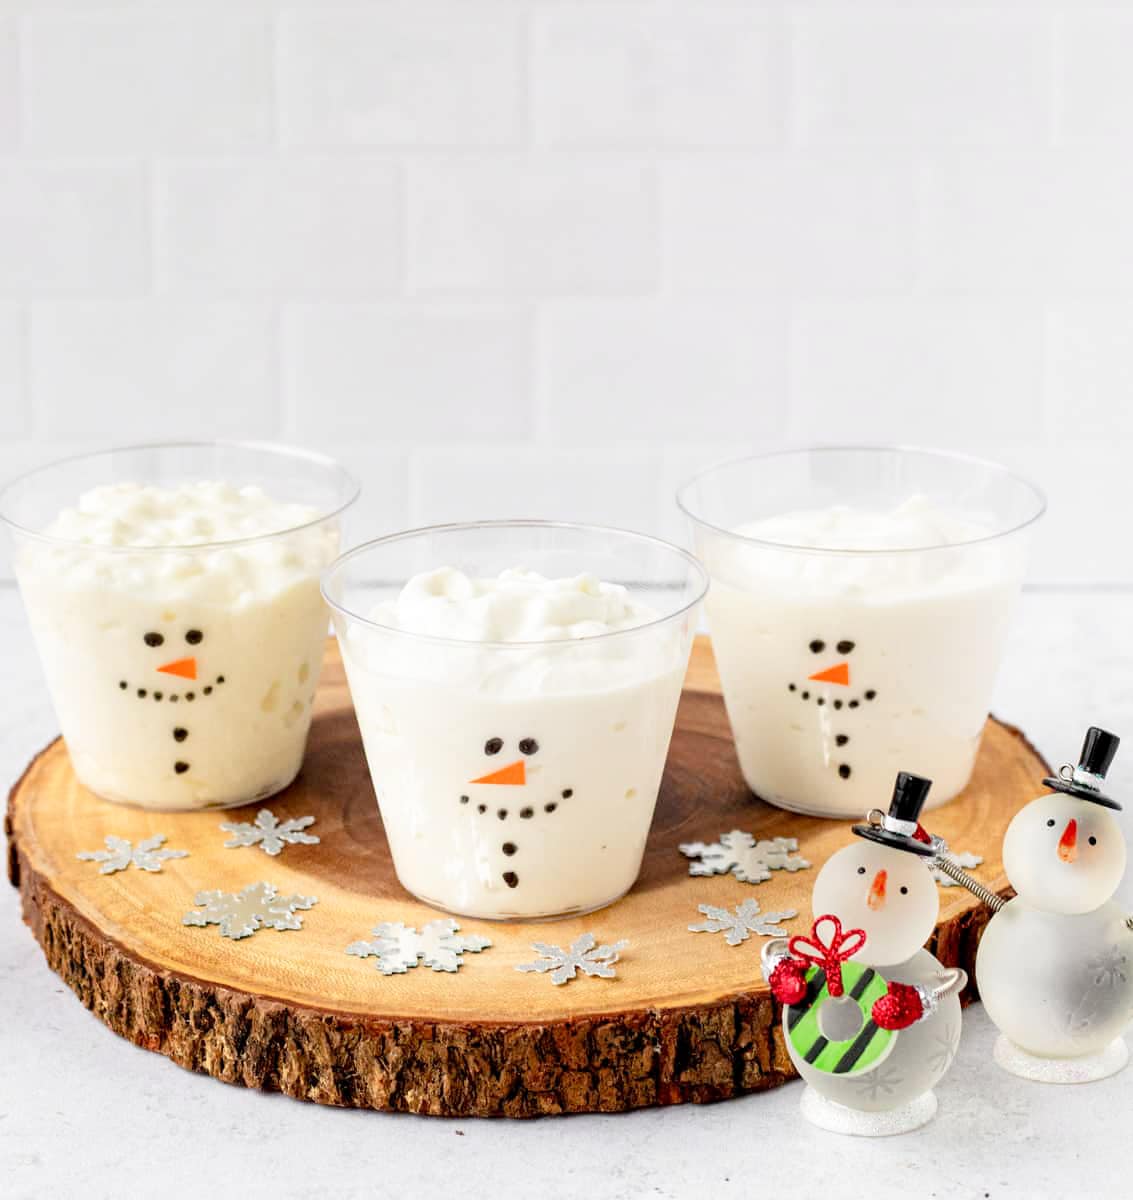 Three frosty yogurt cups on a wooden platter, with decorative snowflakes scatted on the platter.